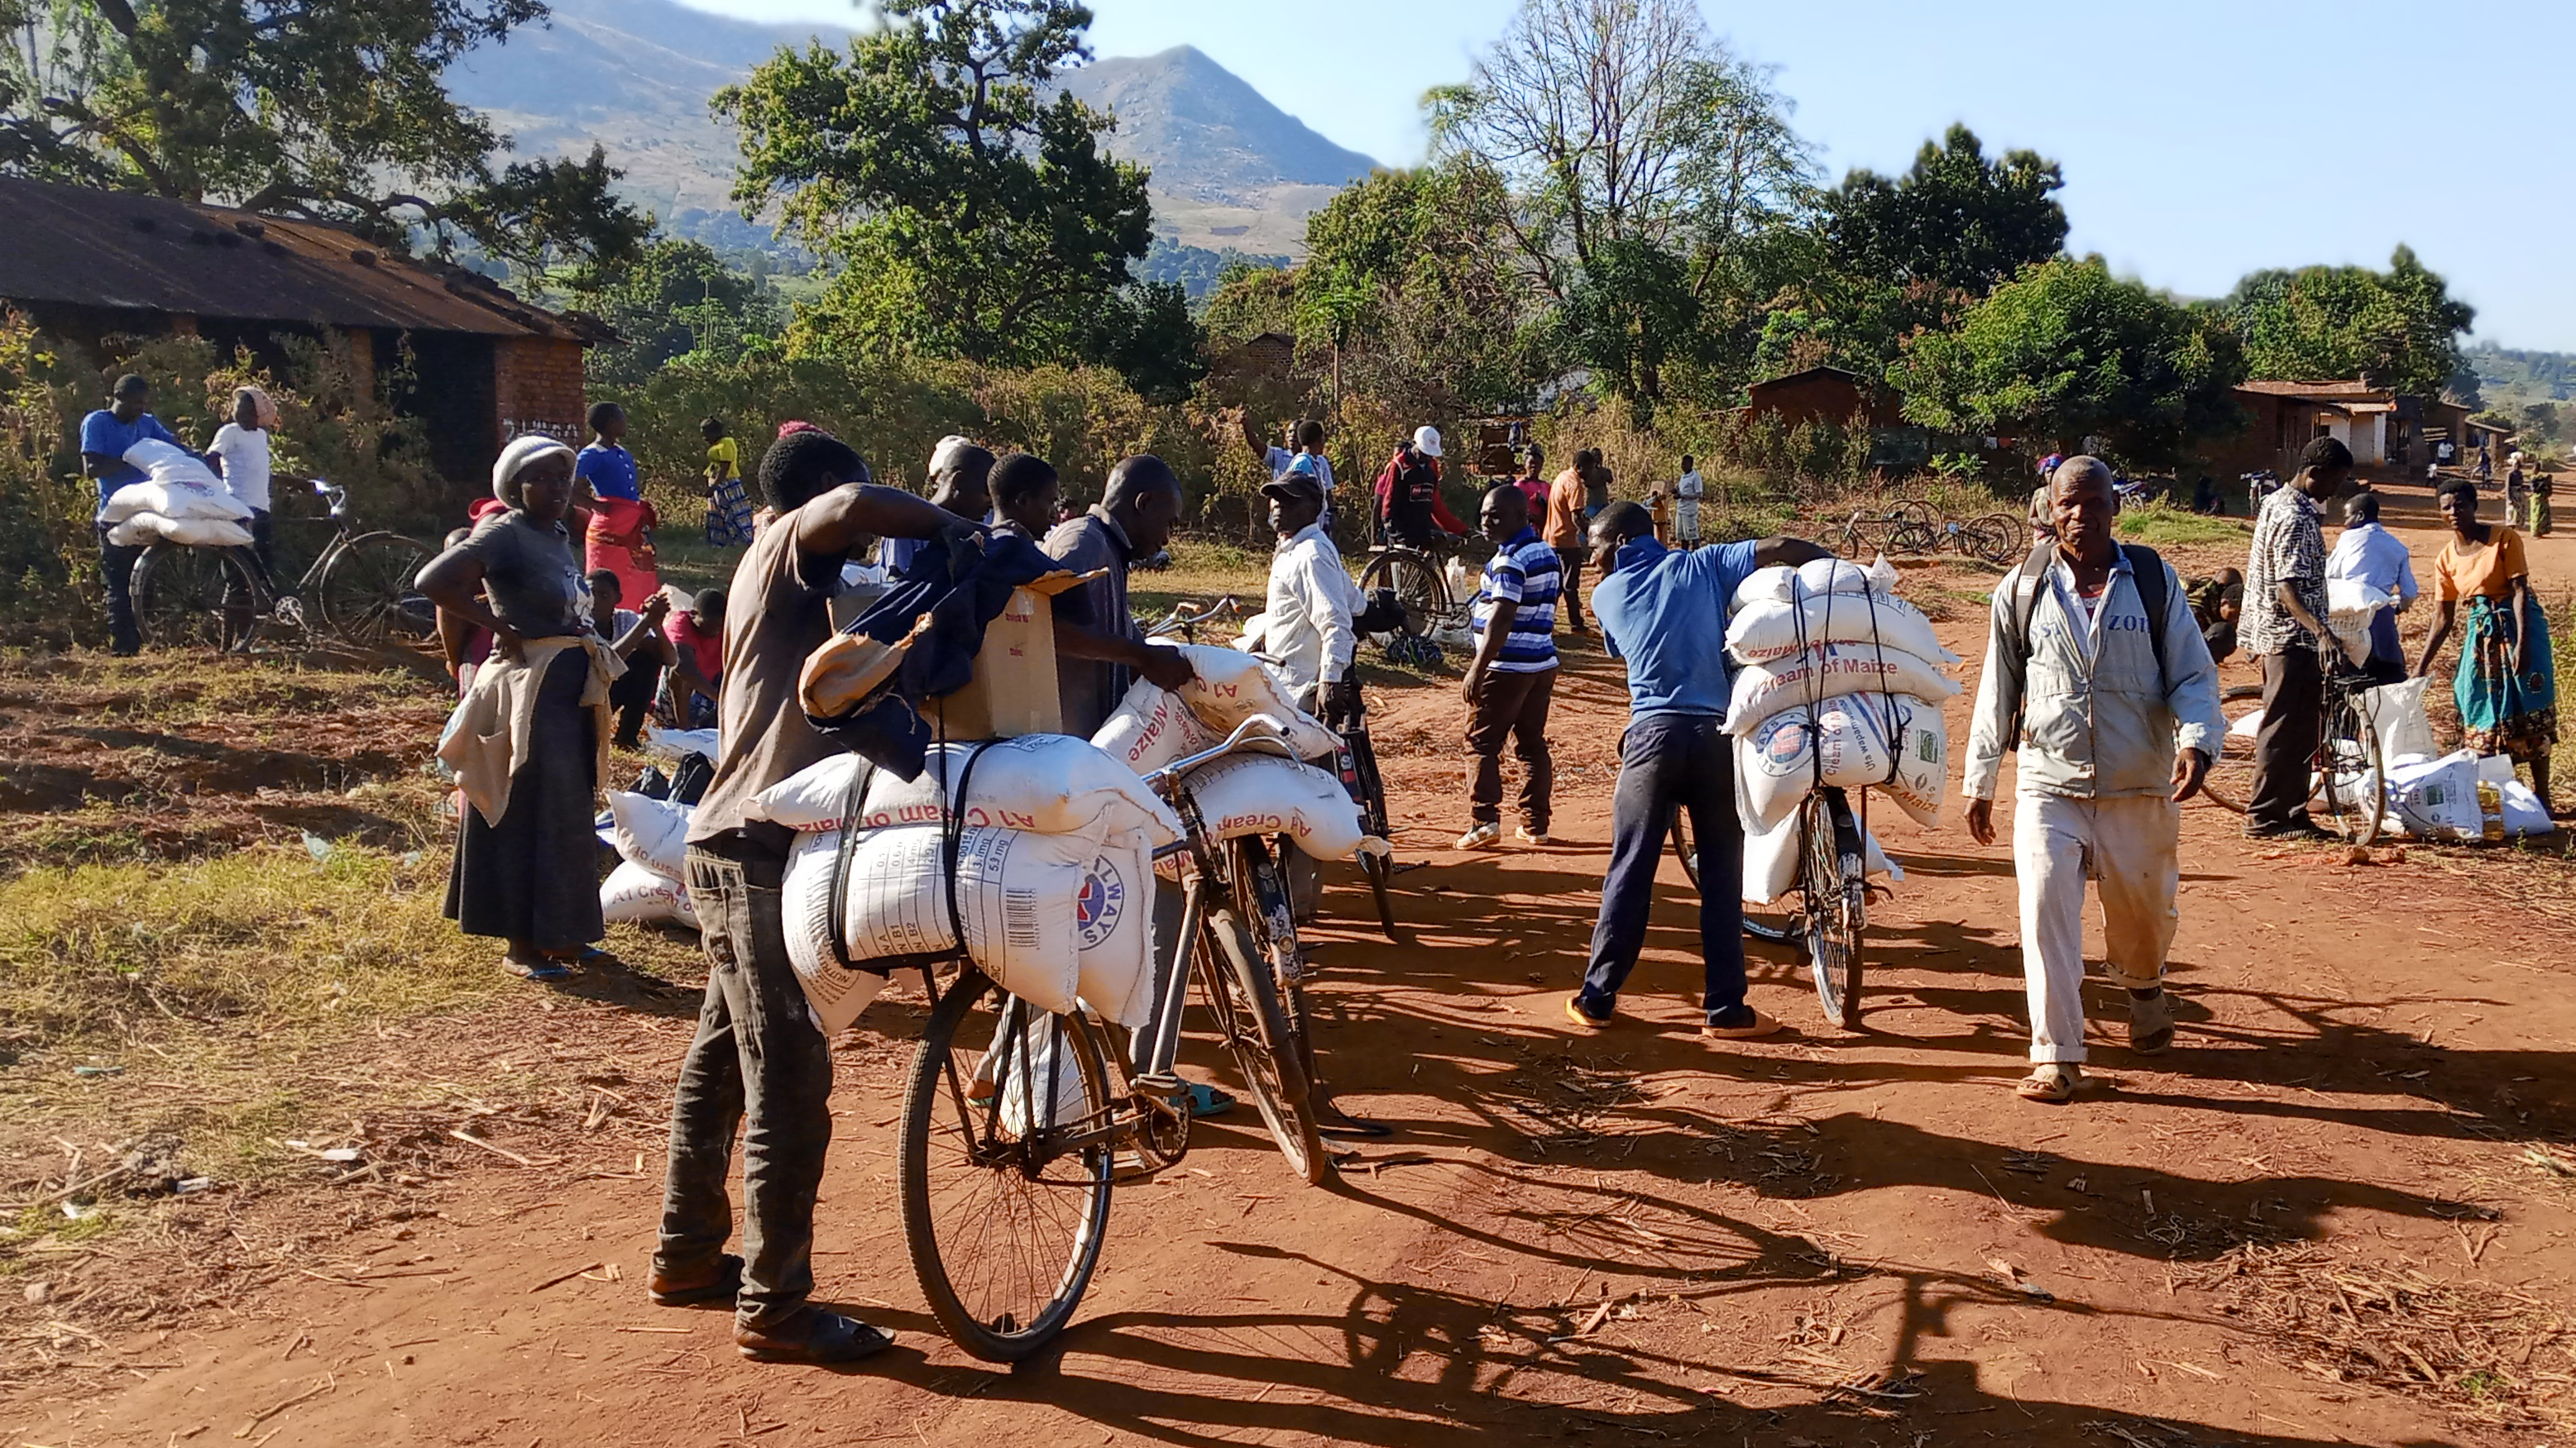 A group of people load bags and boxes onto bicycles for delivery